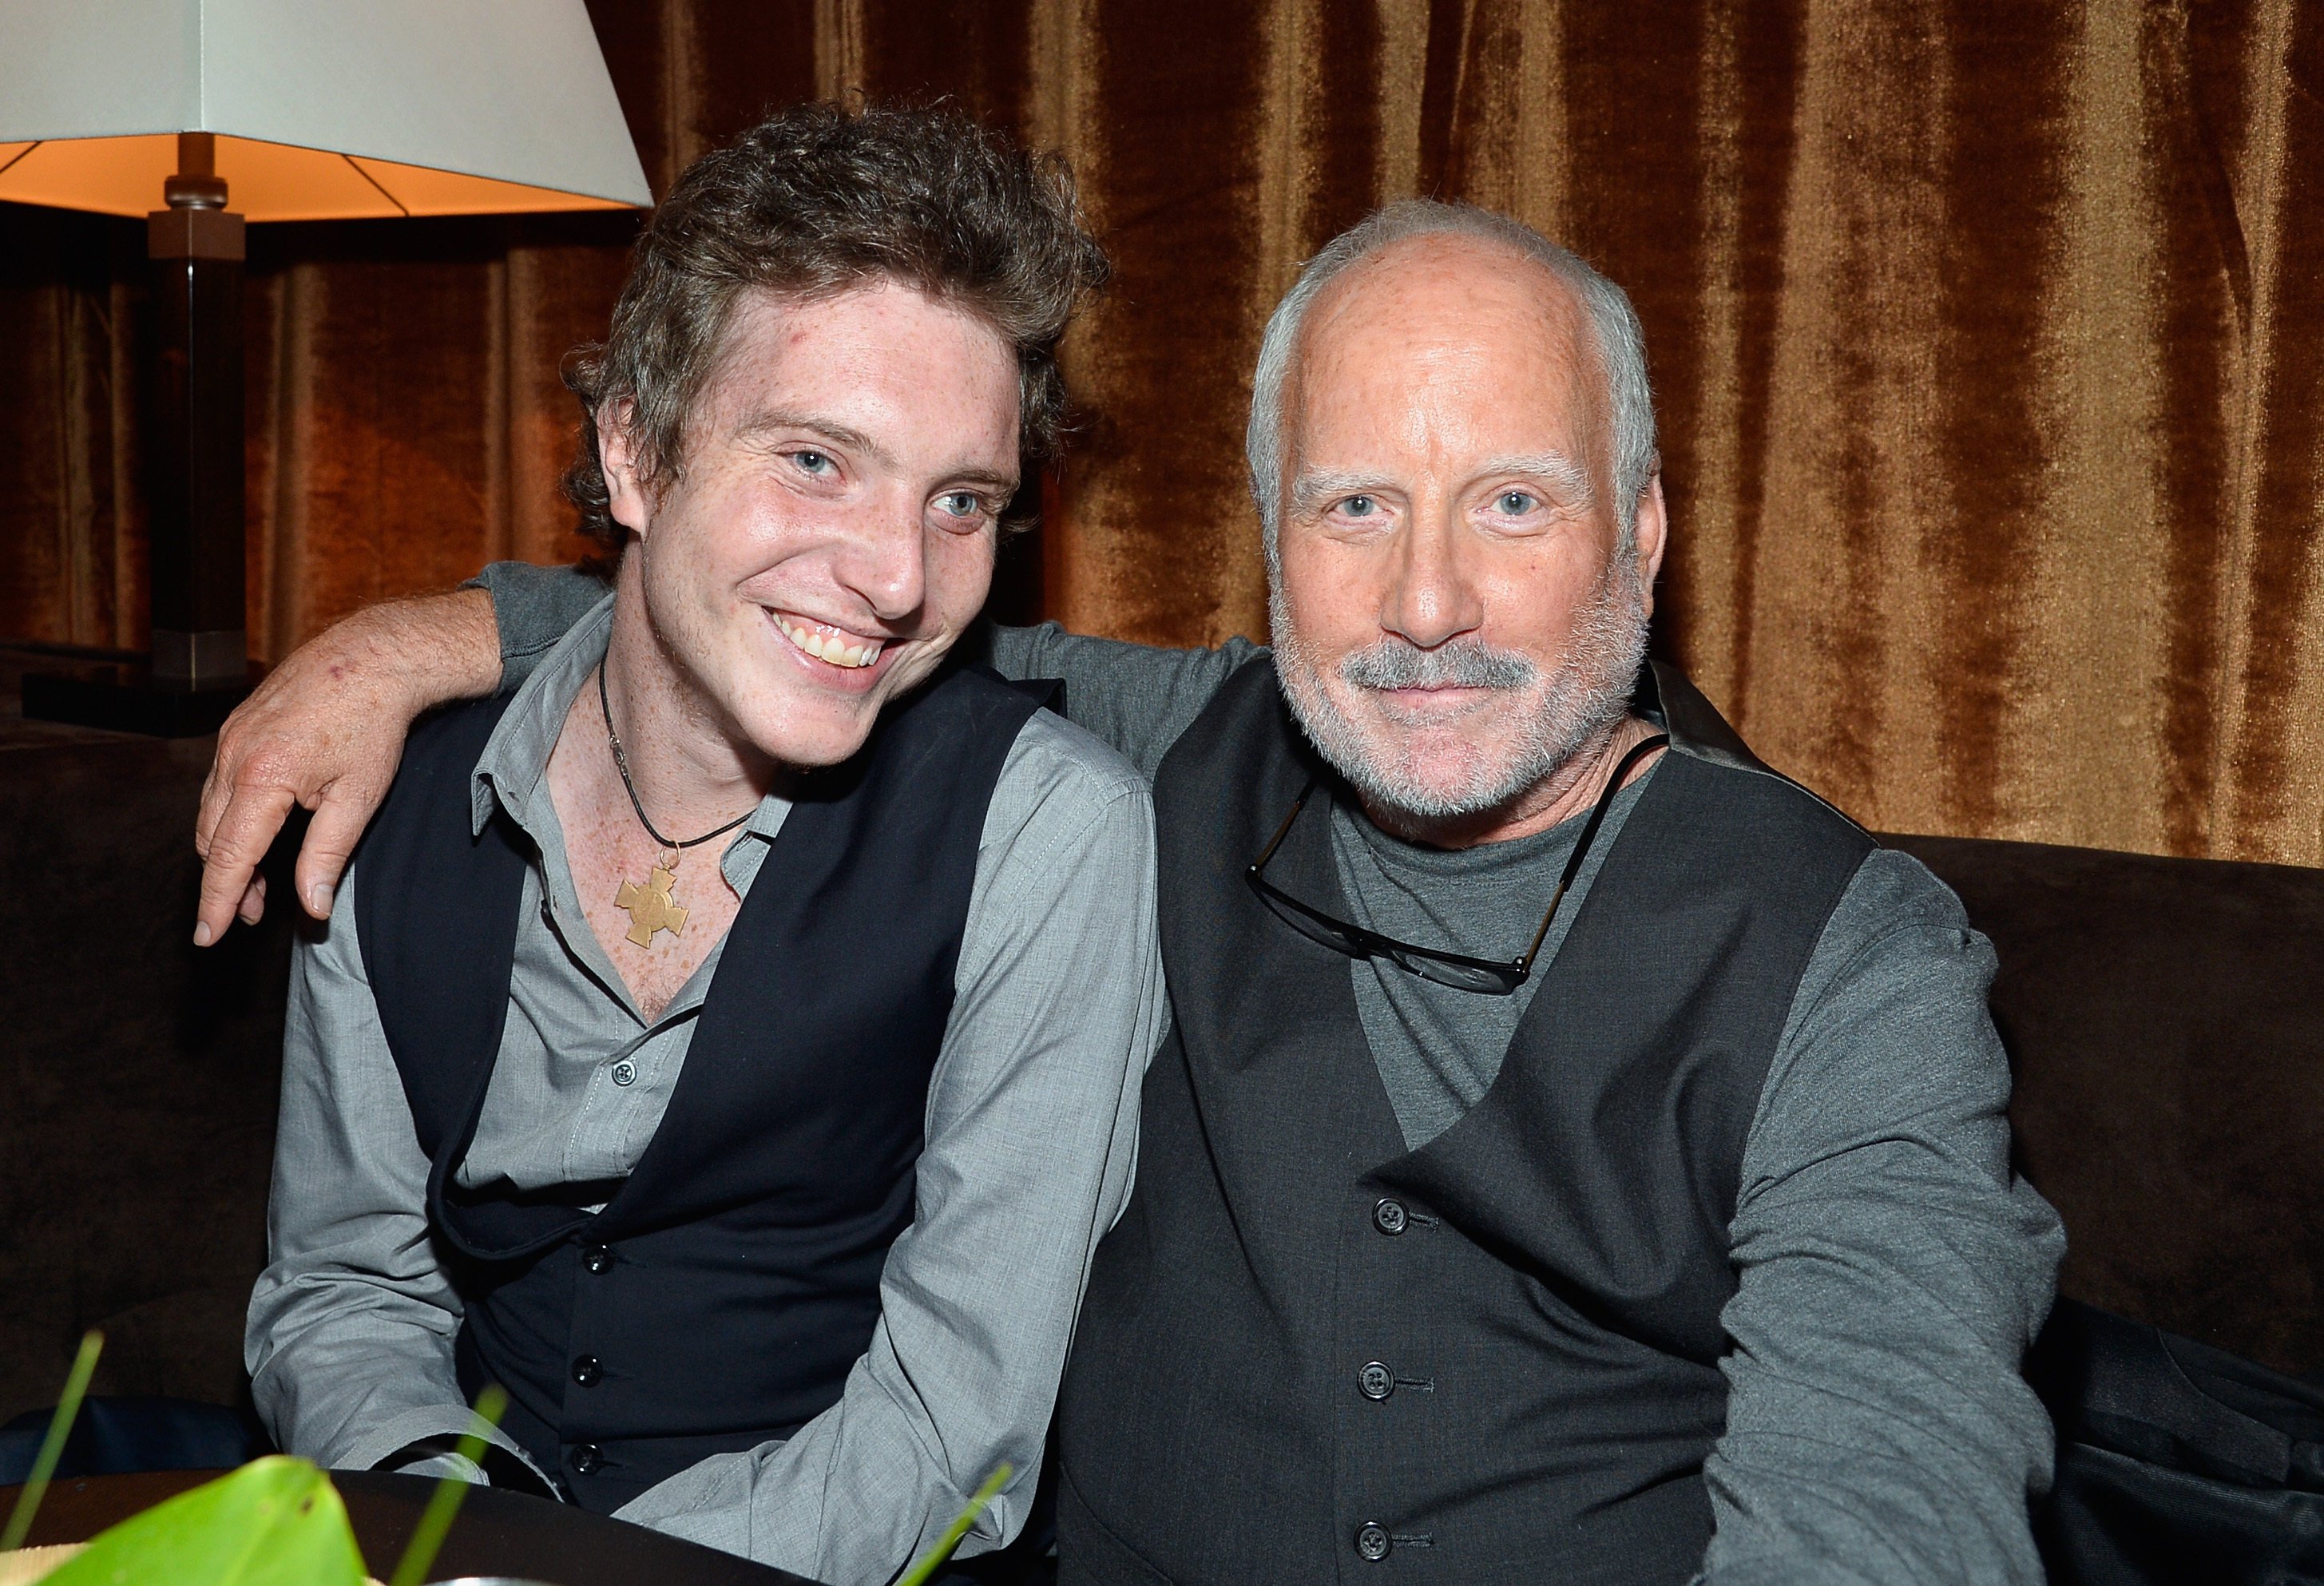 Ben Dreyfuss and actor Richard Dreyfuss attend the after party for the premiere of Relativity Media’s Paranoia at DGA Theater in 2013, in Los Angeles, California. Photo: Getty Images for Relativity Media